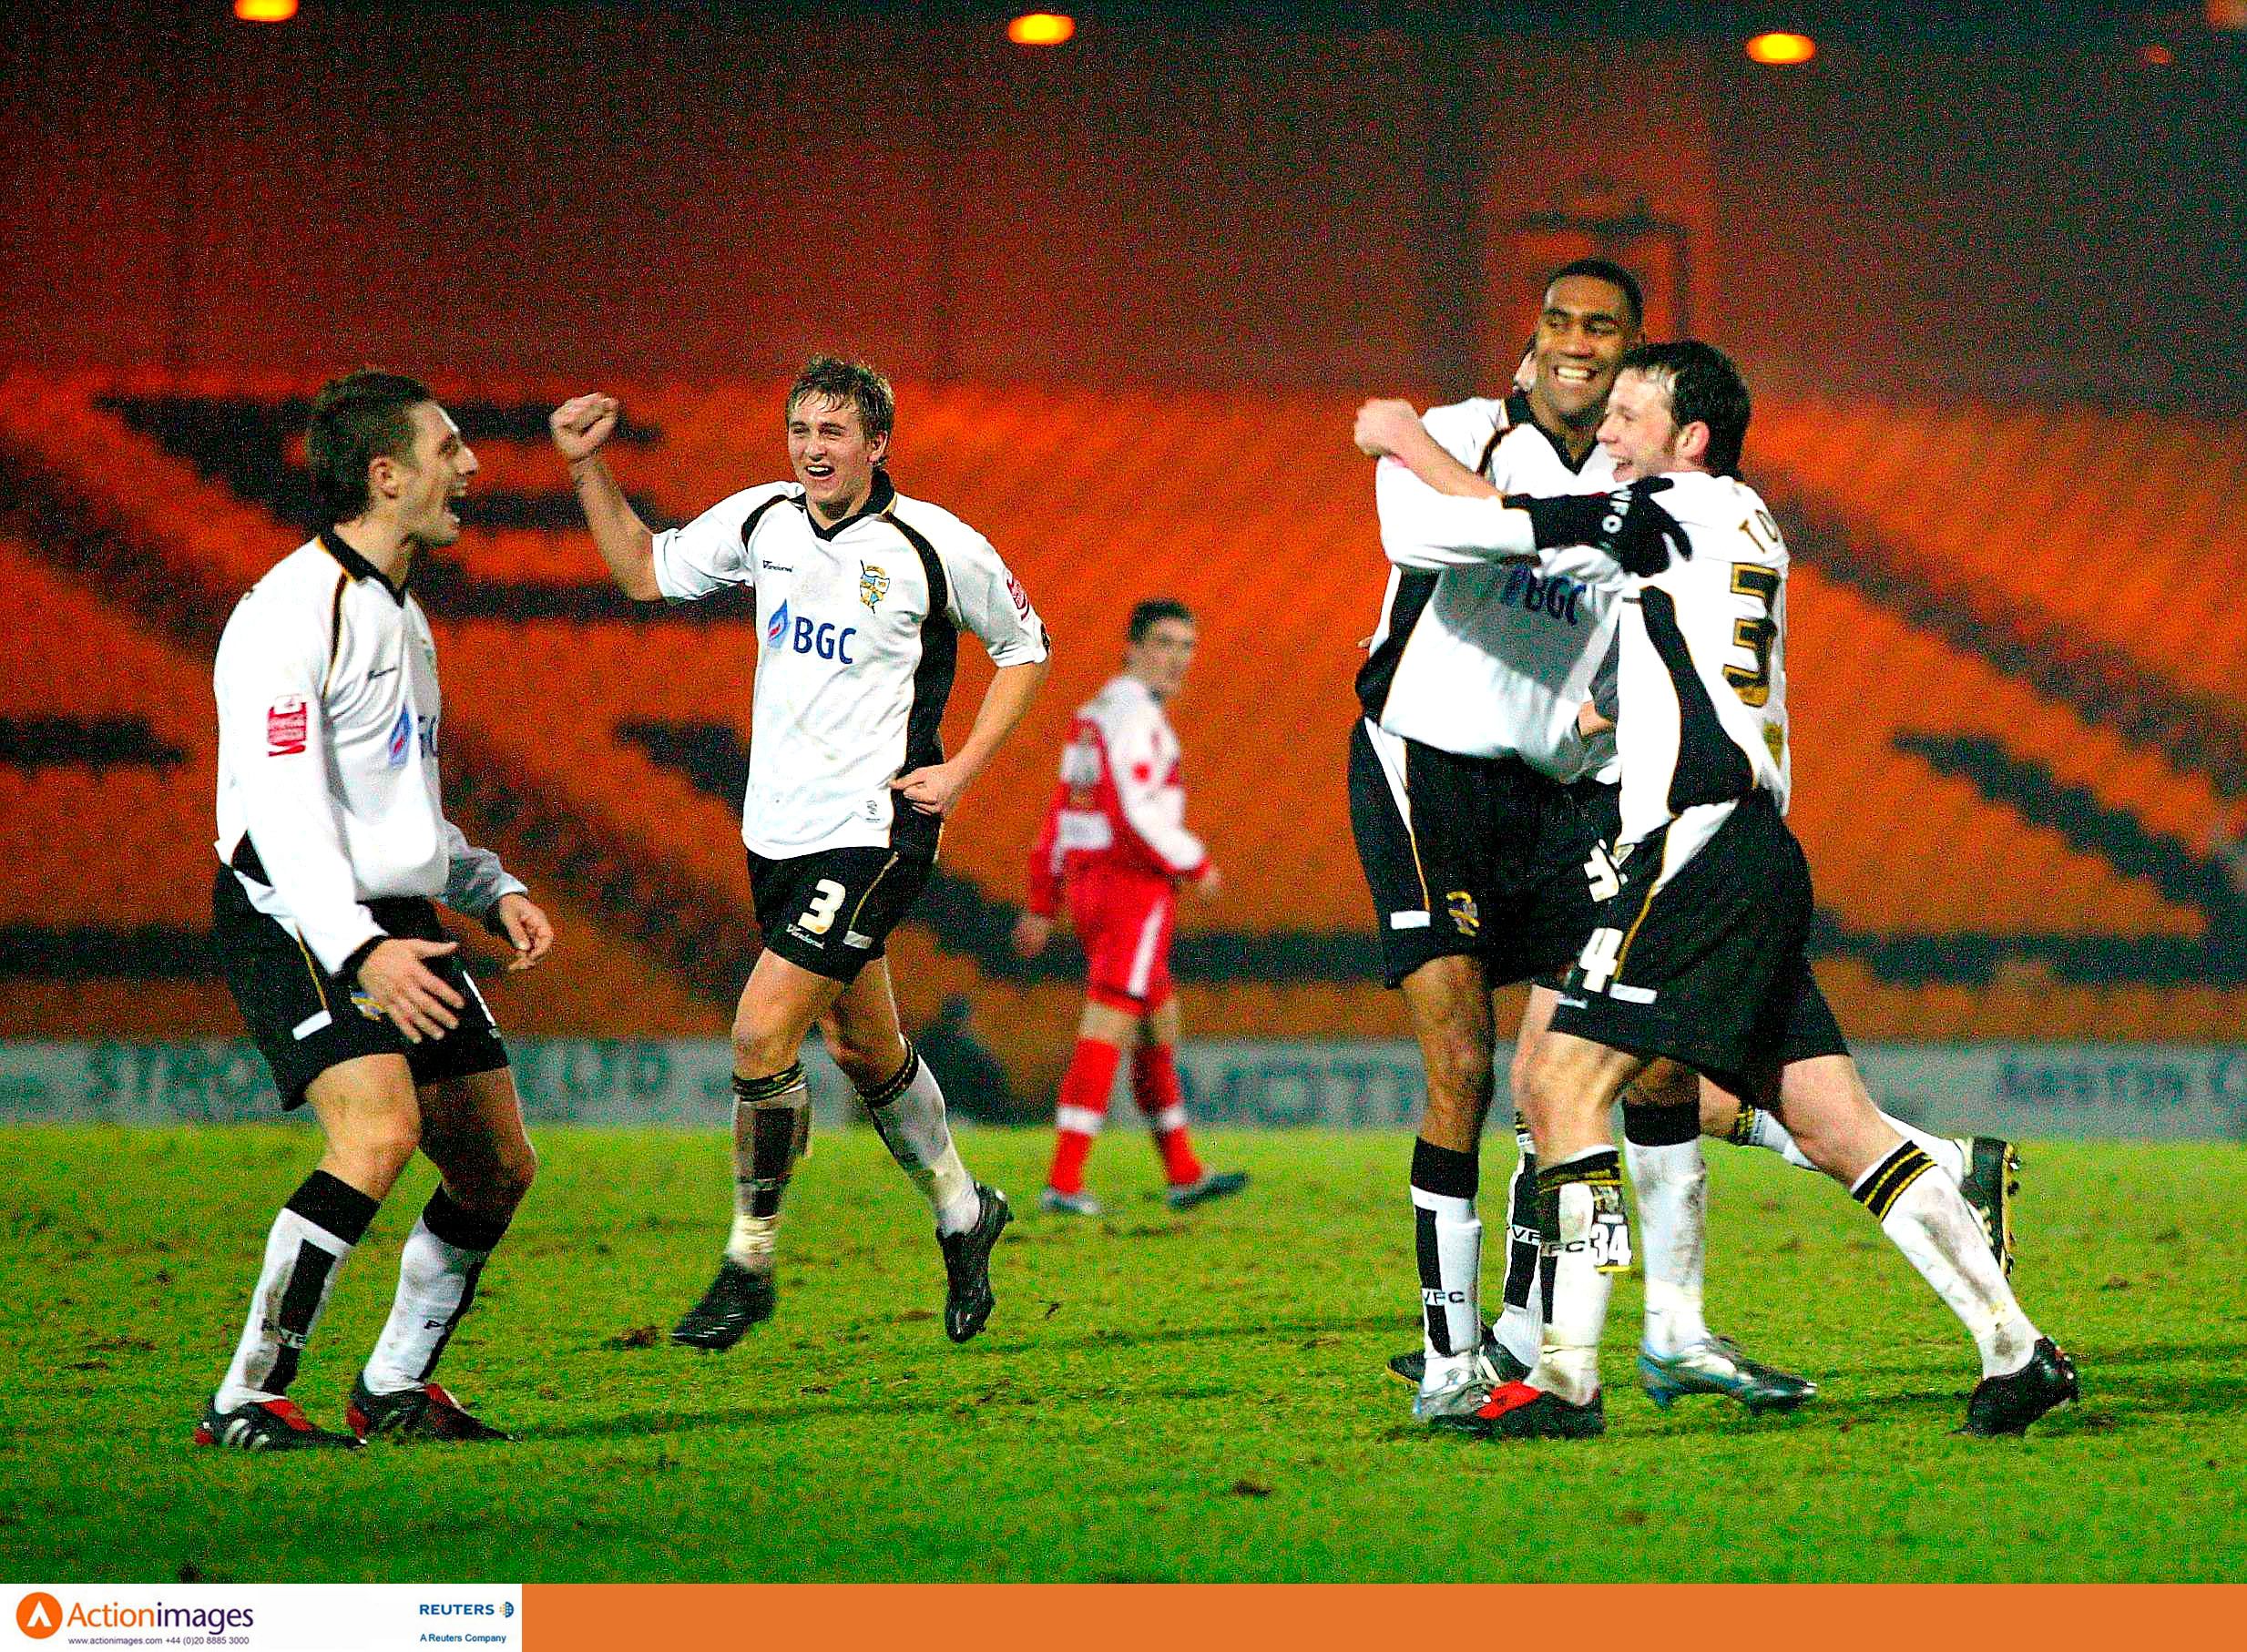 Football - Port Vale v Doncaster Rovers FA Cup Third Round - Vale Park - 6/1/06 
Port Vale's Sam Togwell celebrates scoring the second goal 
Mandatory Credit: Action Images / Brandon Malone 
Livepic